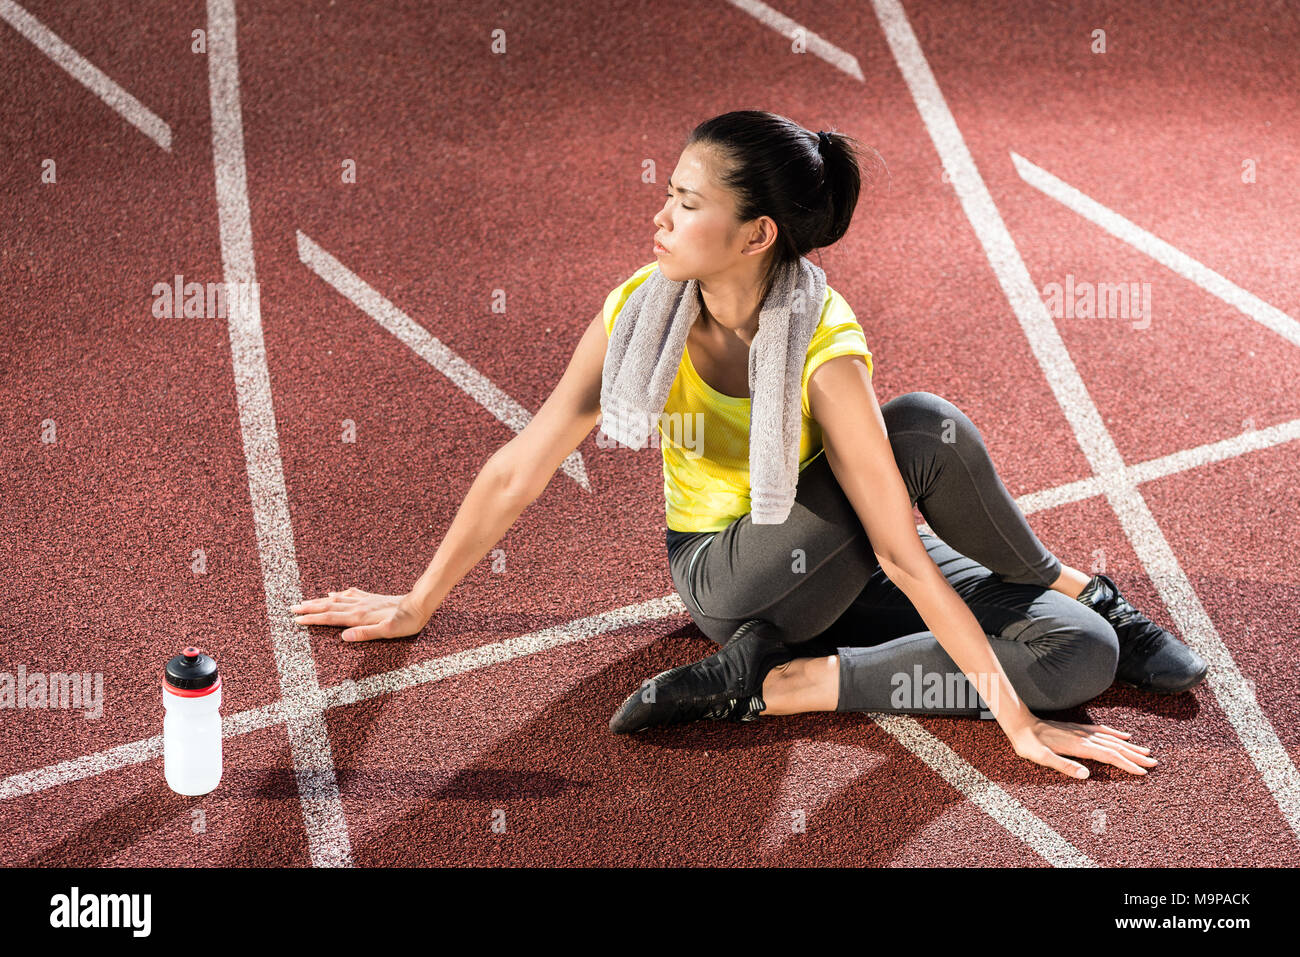 Woman sprinter doing warm up exercise before sprint Stock Photo